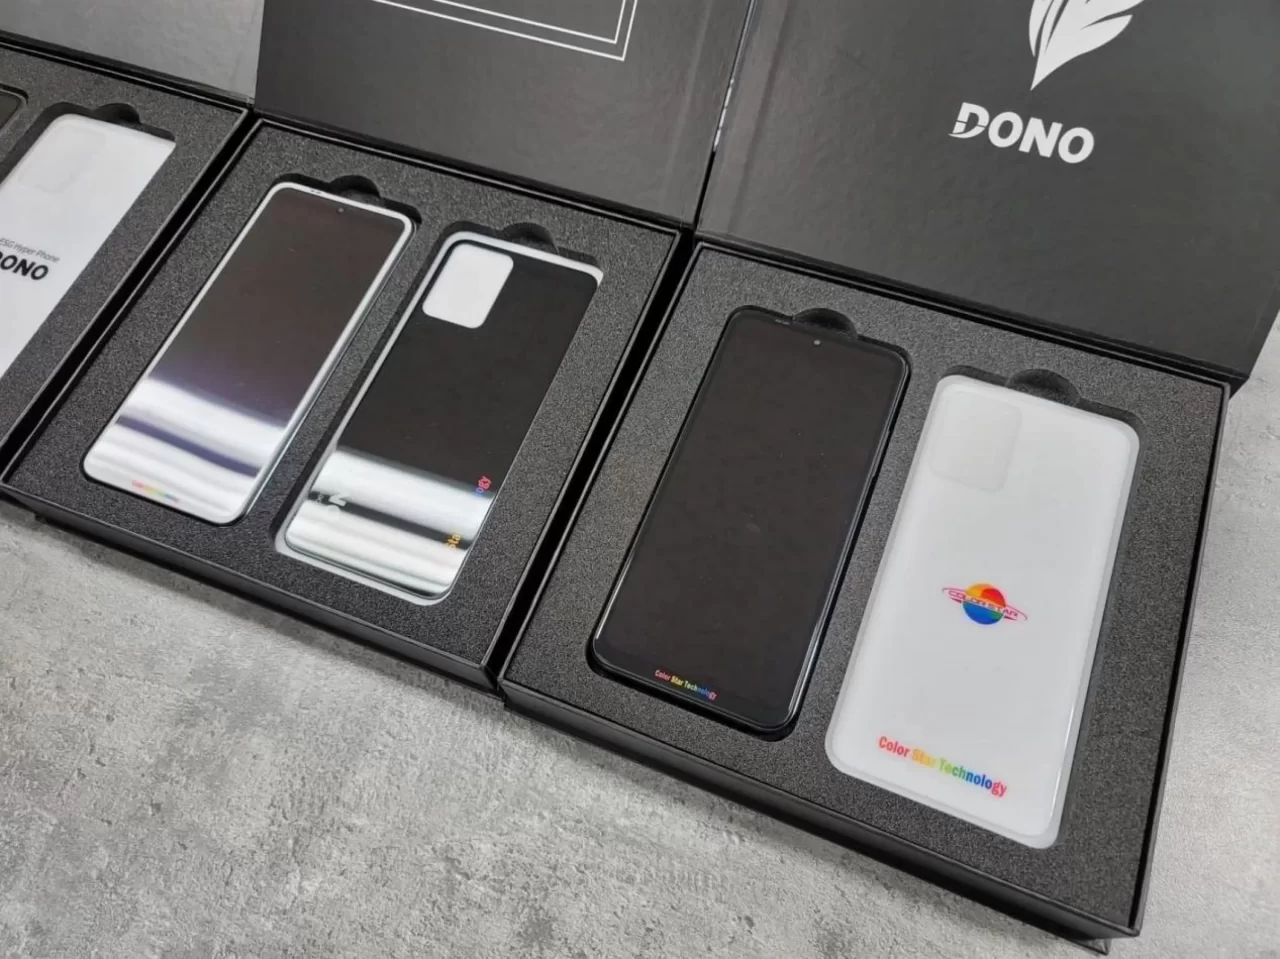 DONO Metaverse Phone Makes Advances in Cyber Security Technology as Color Star Stresses Importance of Network Security img#1